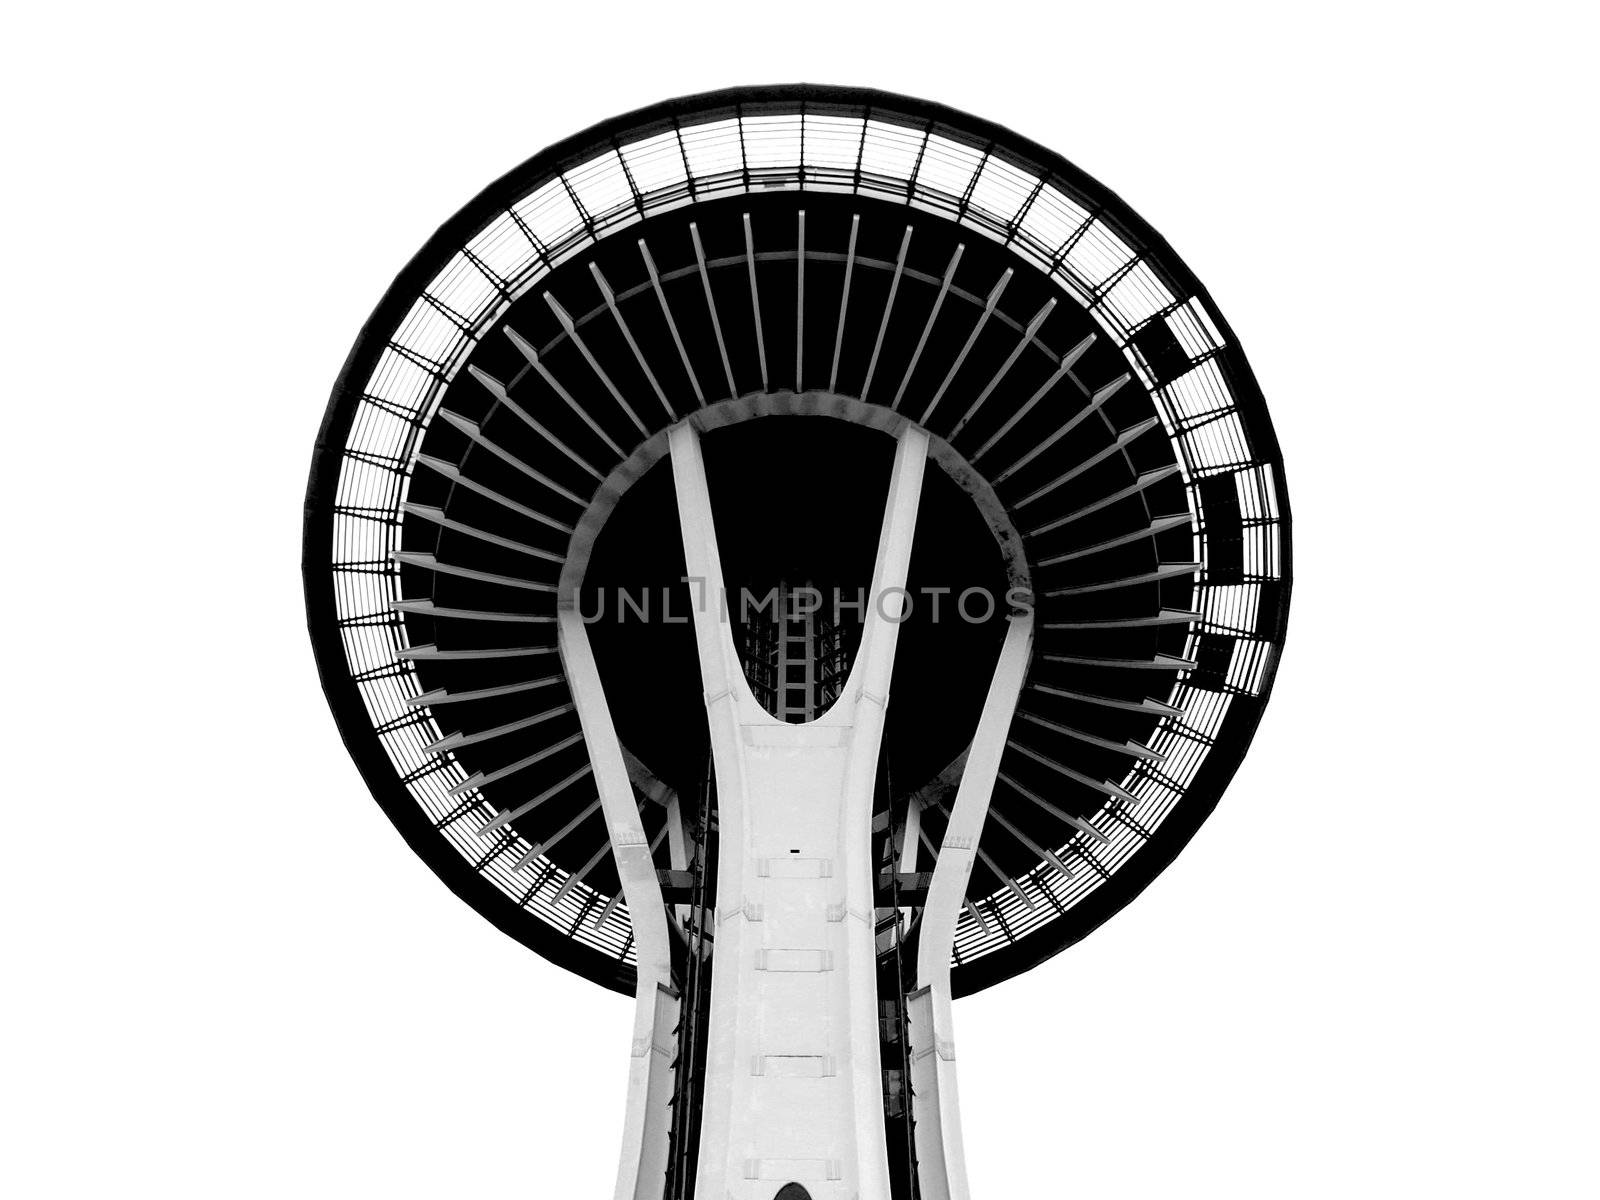 SEATTLE - SEPTEMBER 6: Space Needle in Seattle on September 6, 2 by anderm